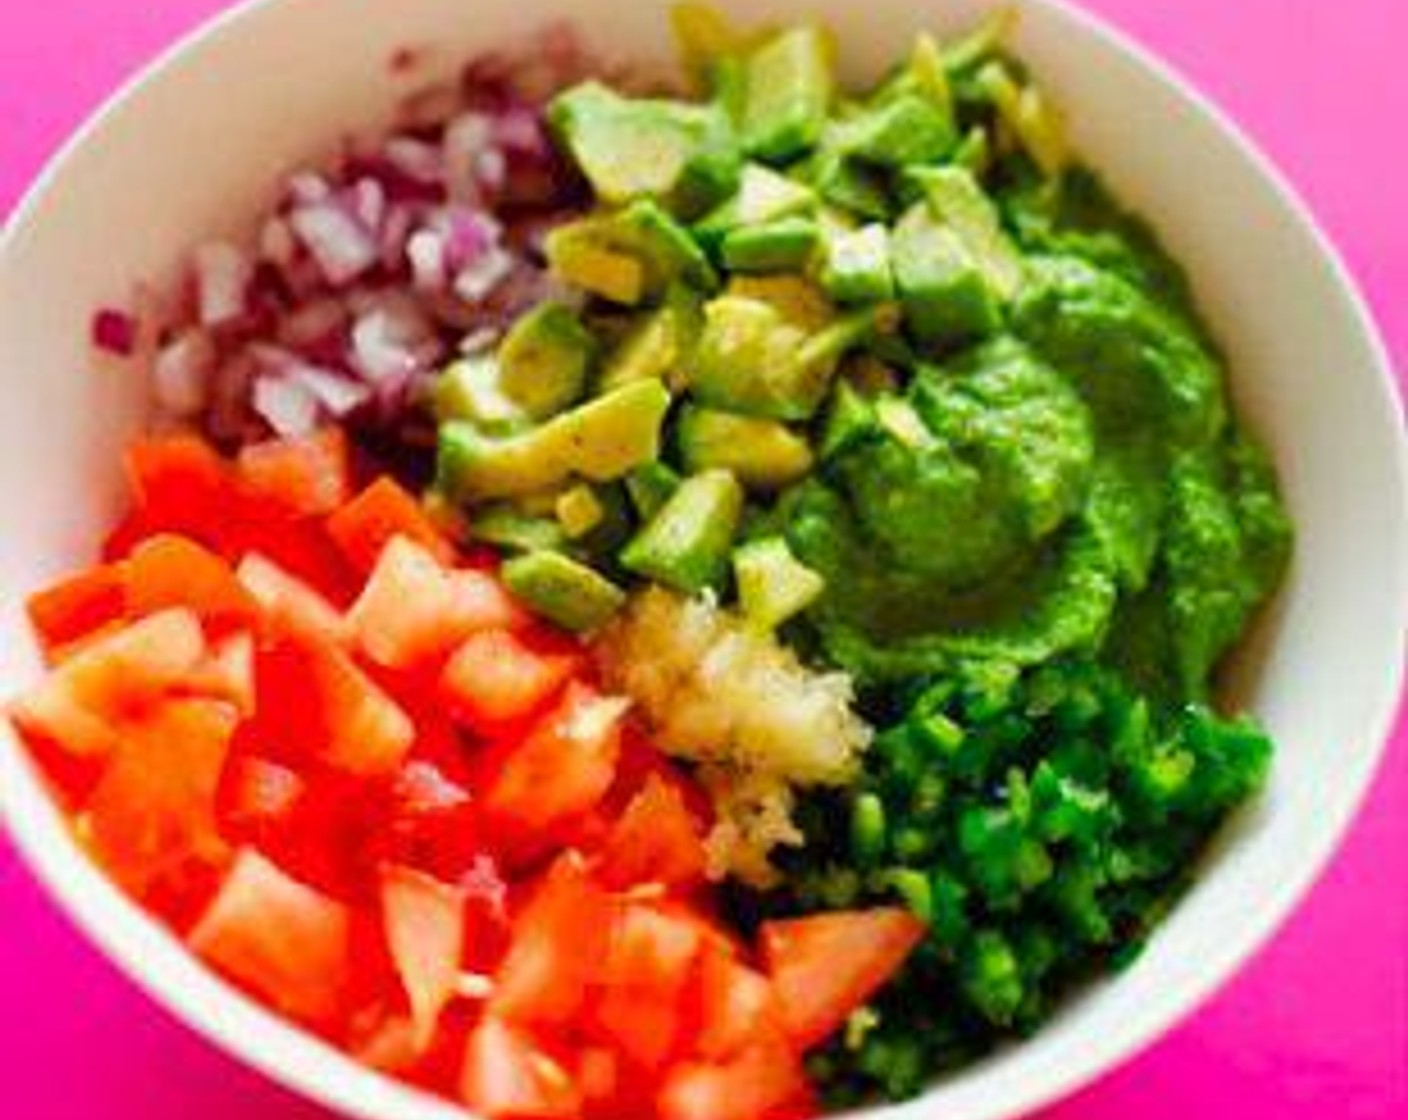 step 2 Chop the remaining Avocado (1) into small chunks, then mix and mash into the puree, along with the Red Onion (1/4 cup), Jalapeño Pepper (1), and Garlic (1 clove). Once you reach a consistency to your liking, stir in the Tomato (1/2 cup).